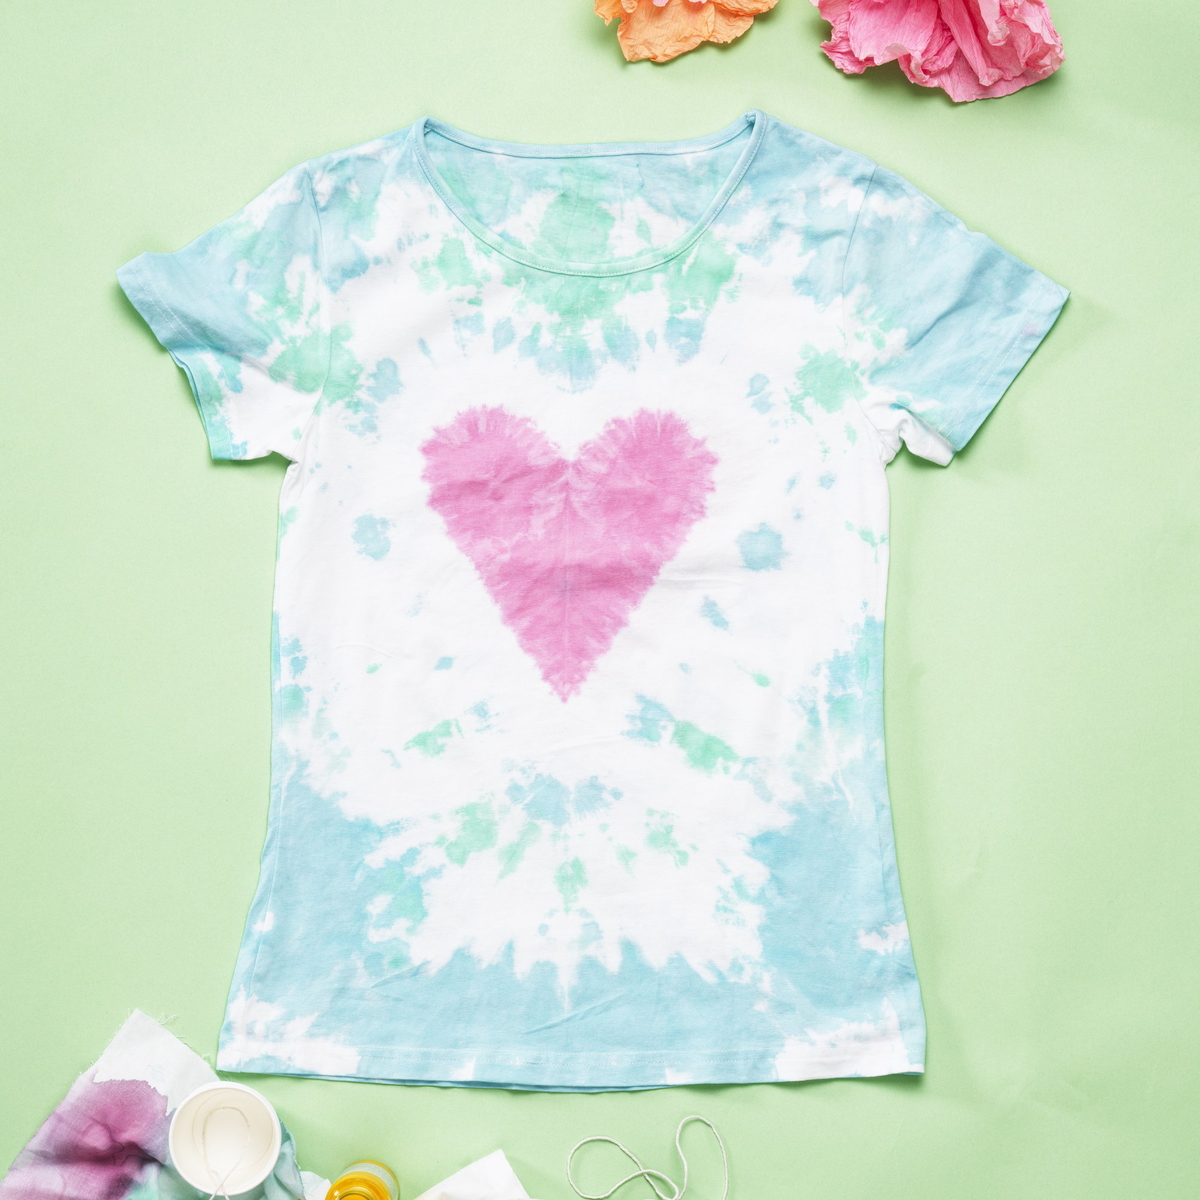 Tie-dyed heart